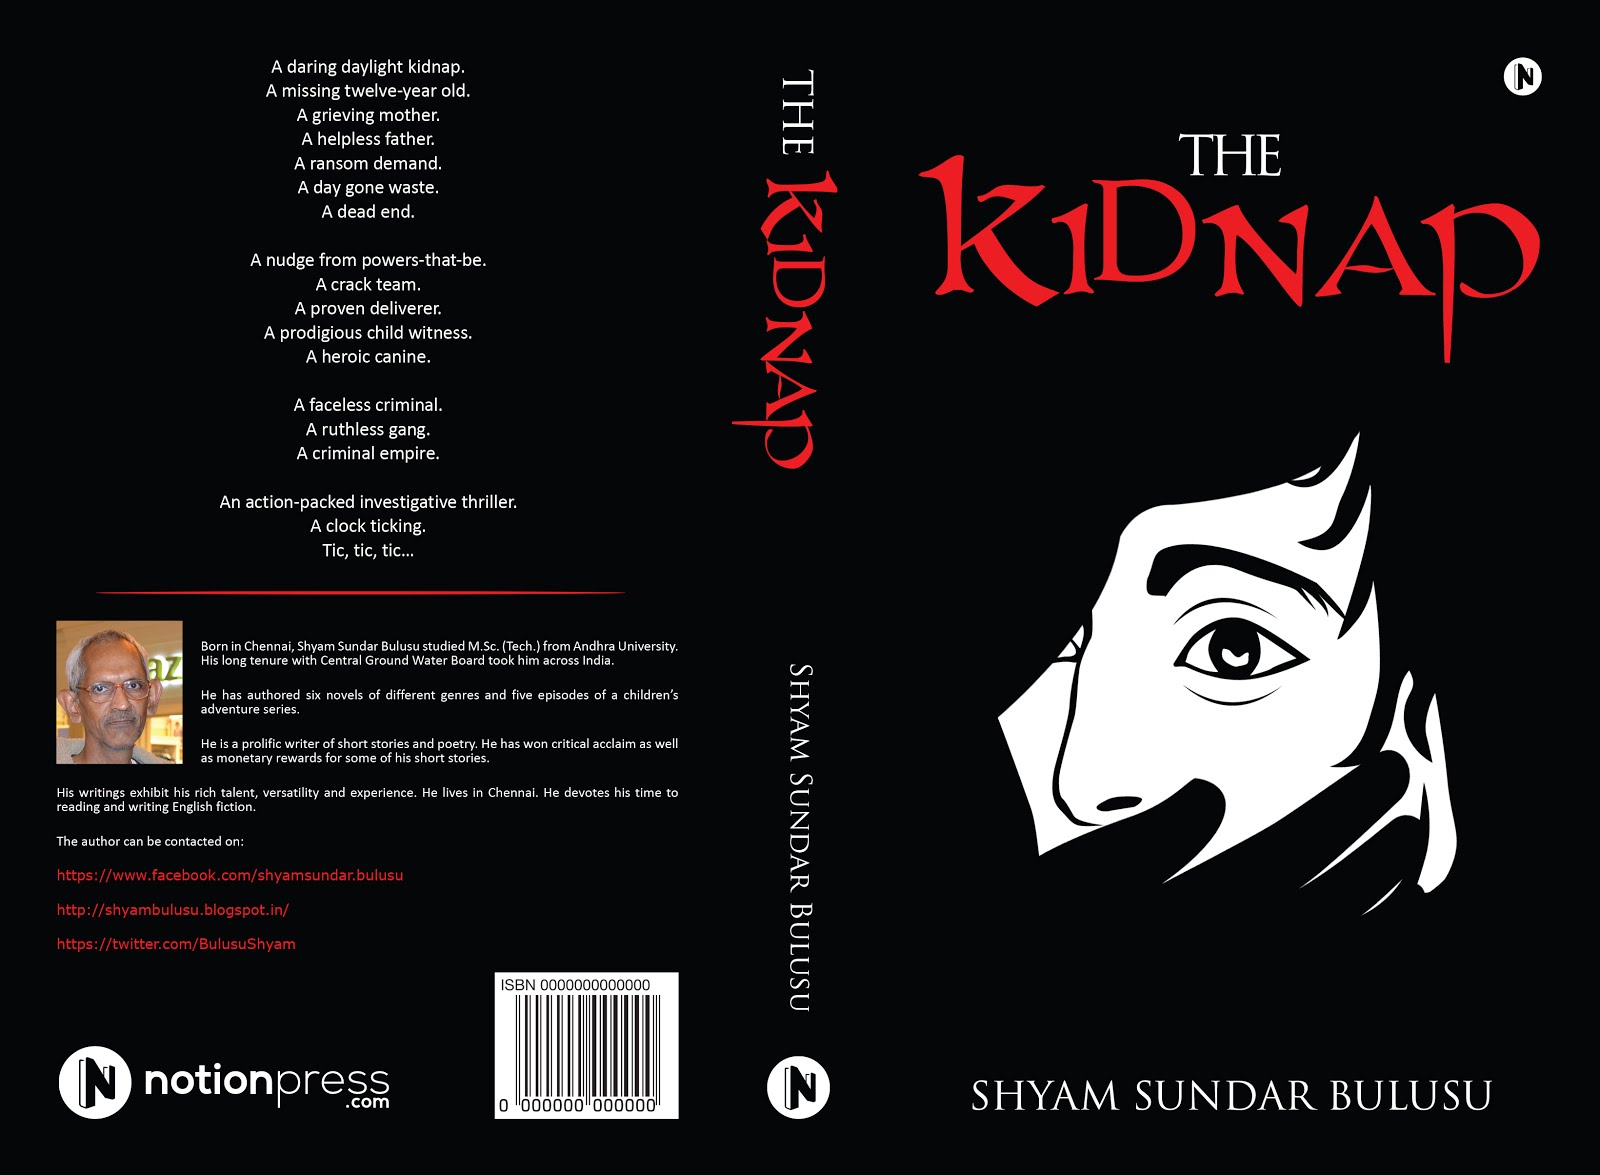 THE KIDNAP